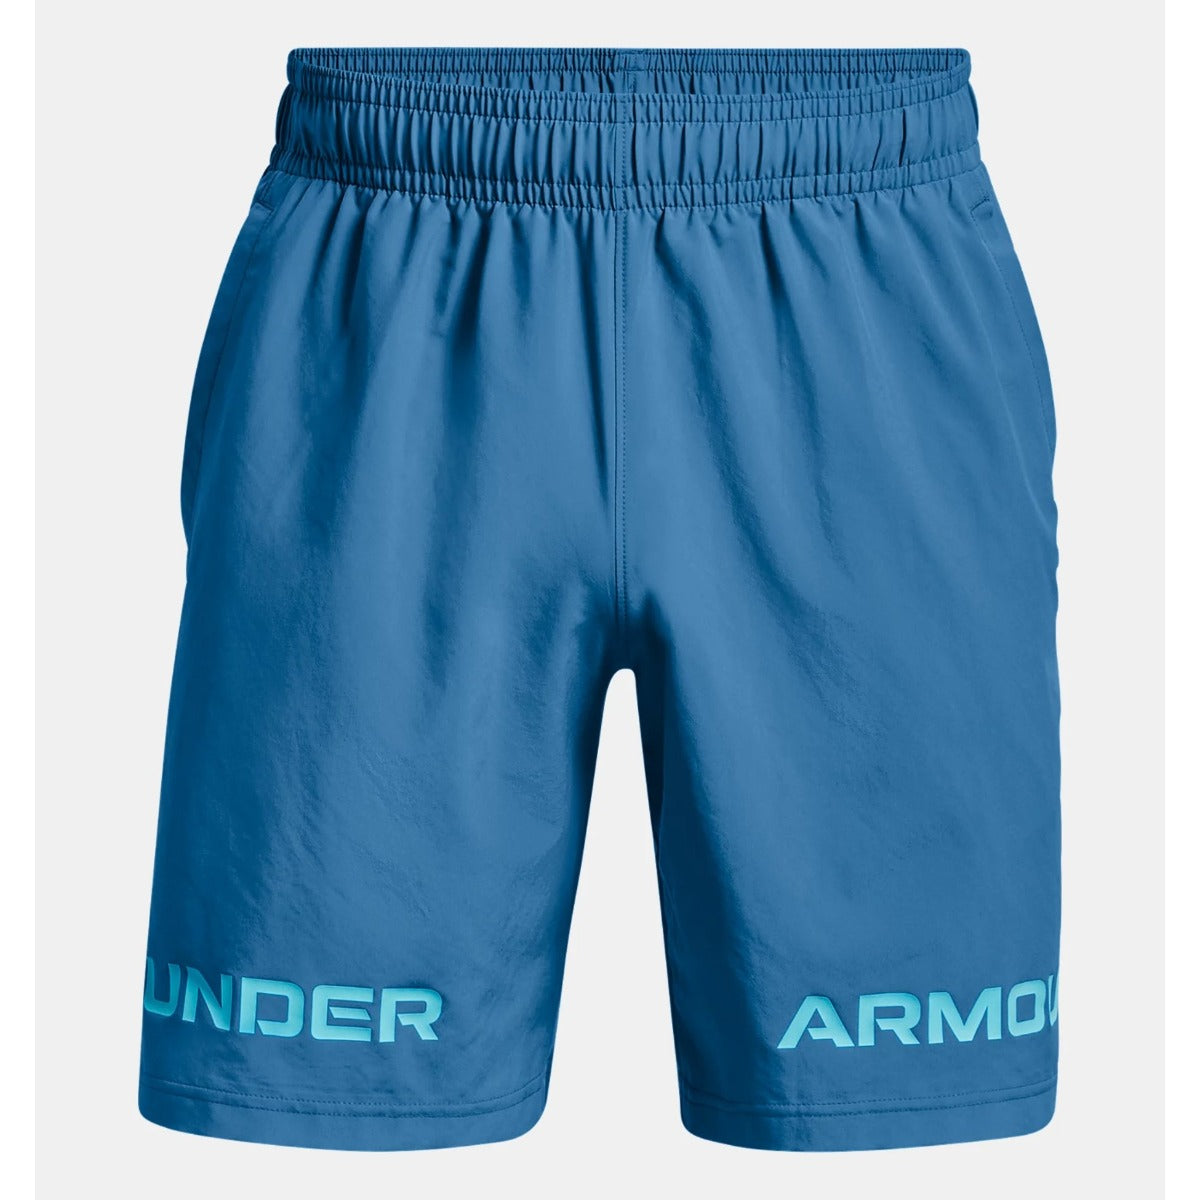 Under Armour Woven Graphic Wordmark Shorts Mens (Blue 899)